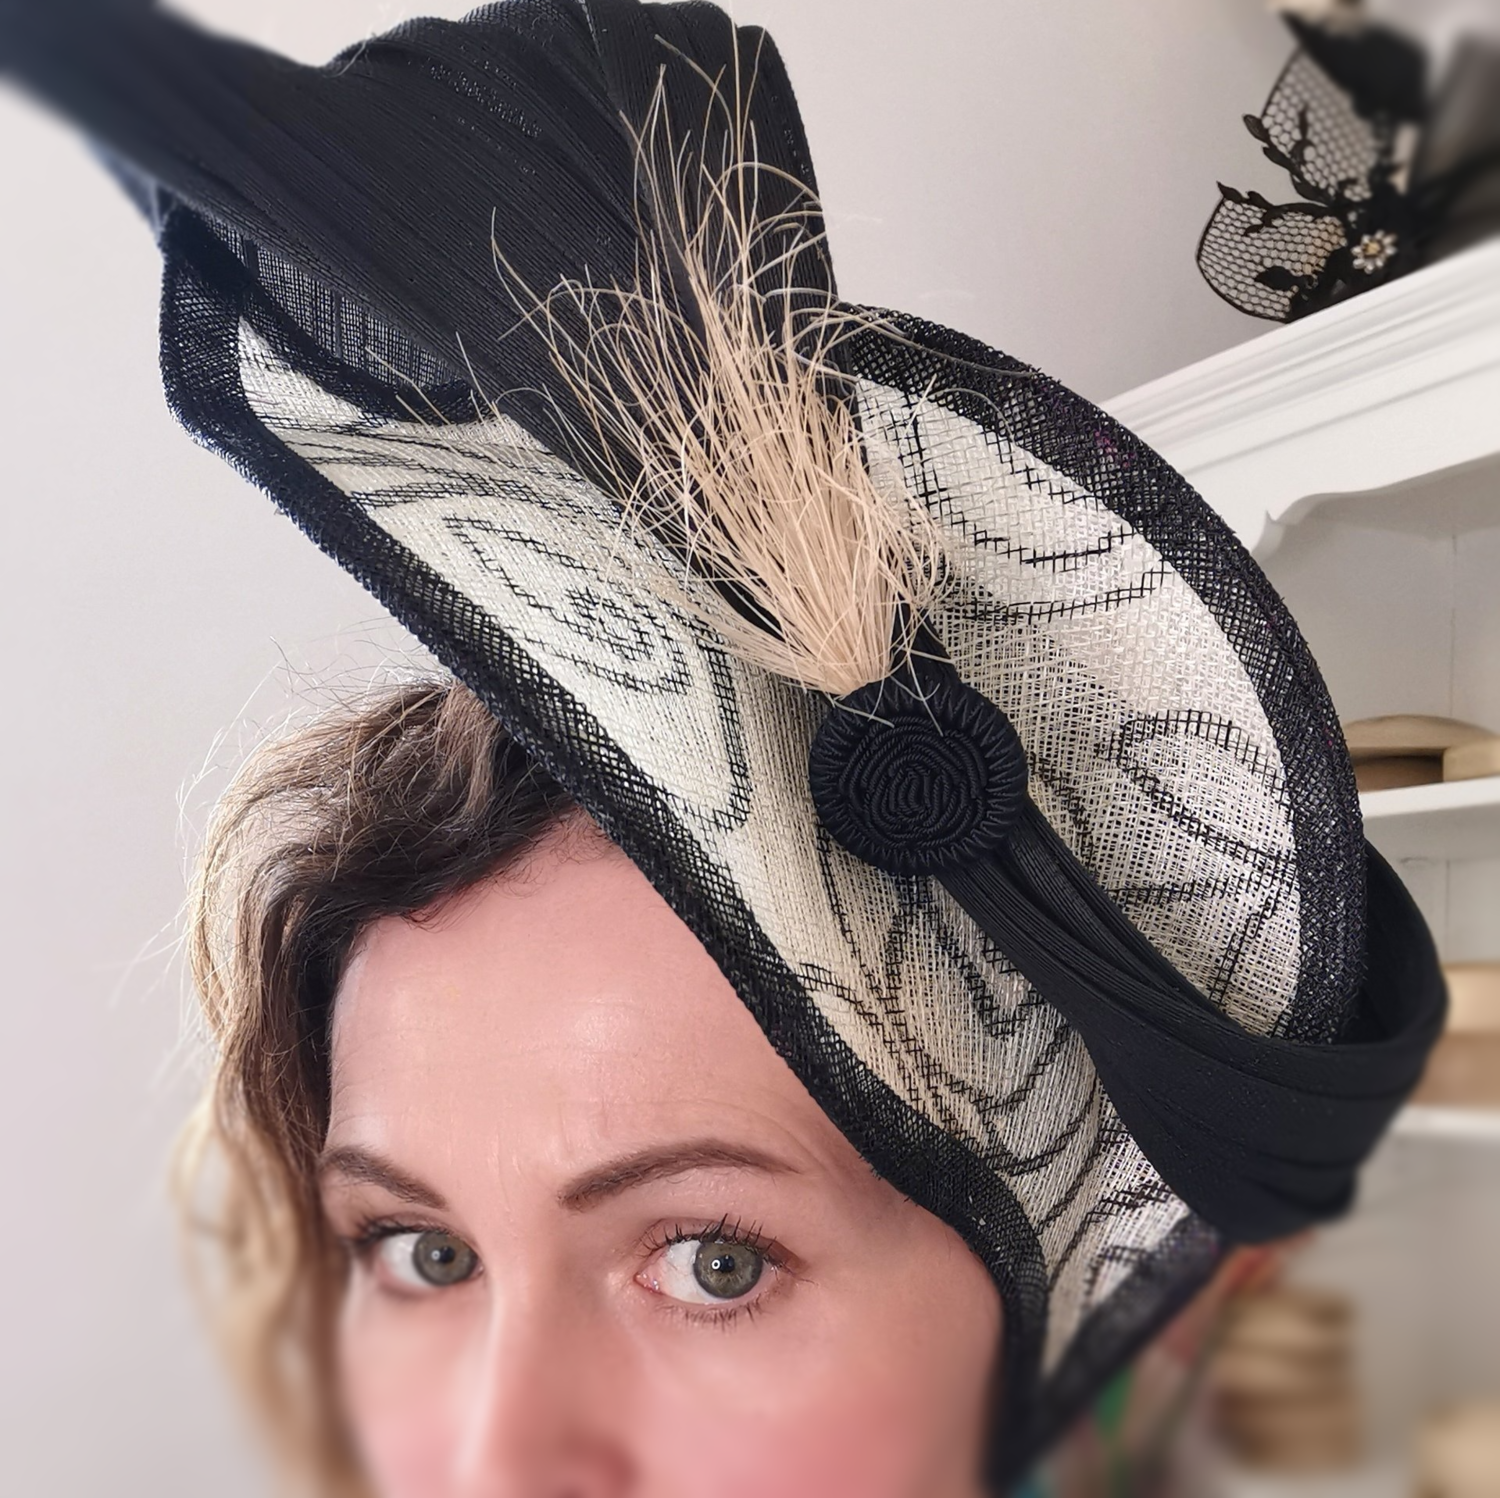 MFB Use a pattern to create a Headpiece
Online Millinery Course